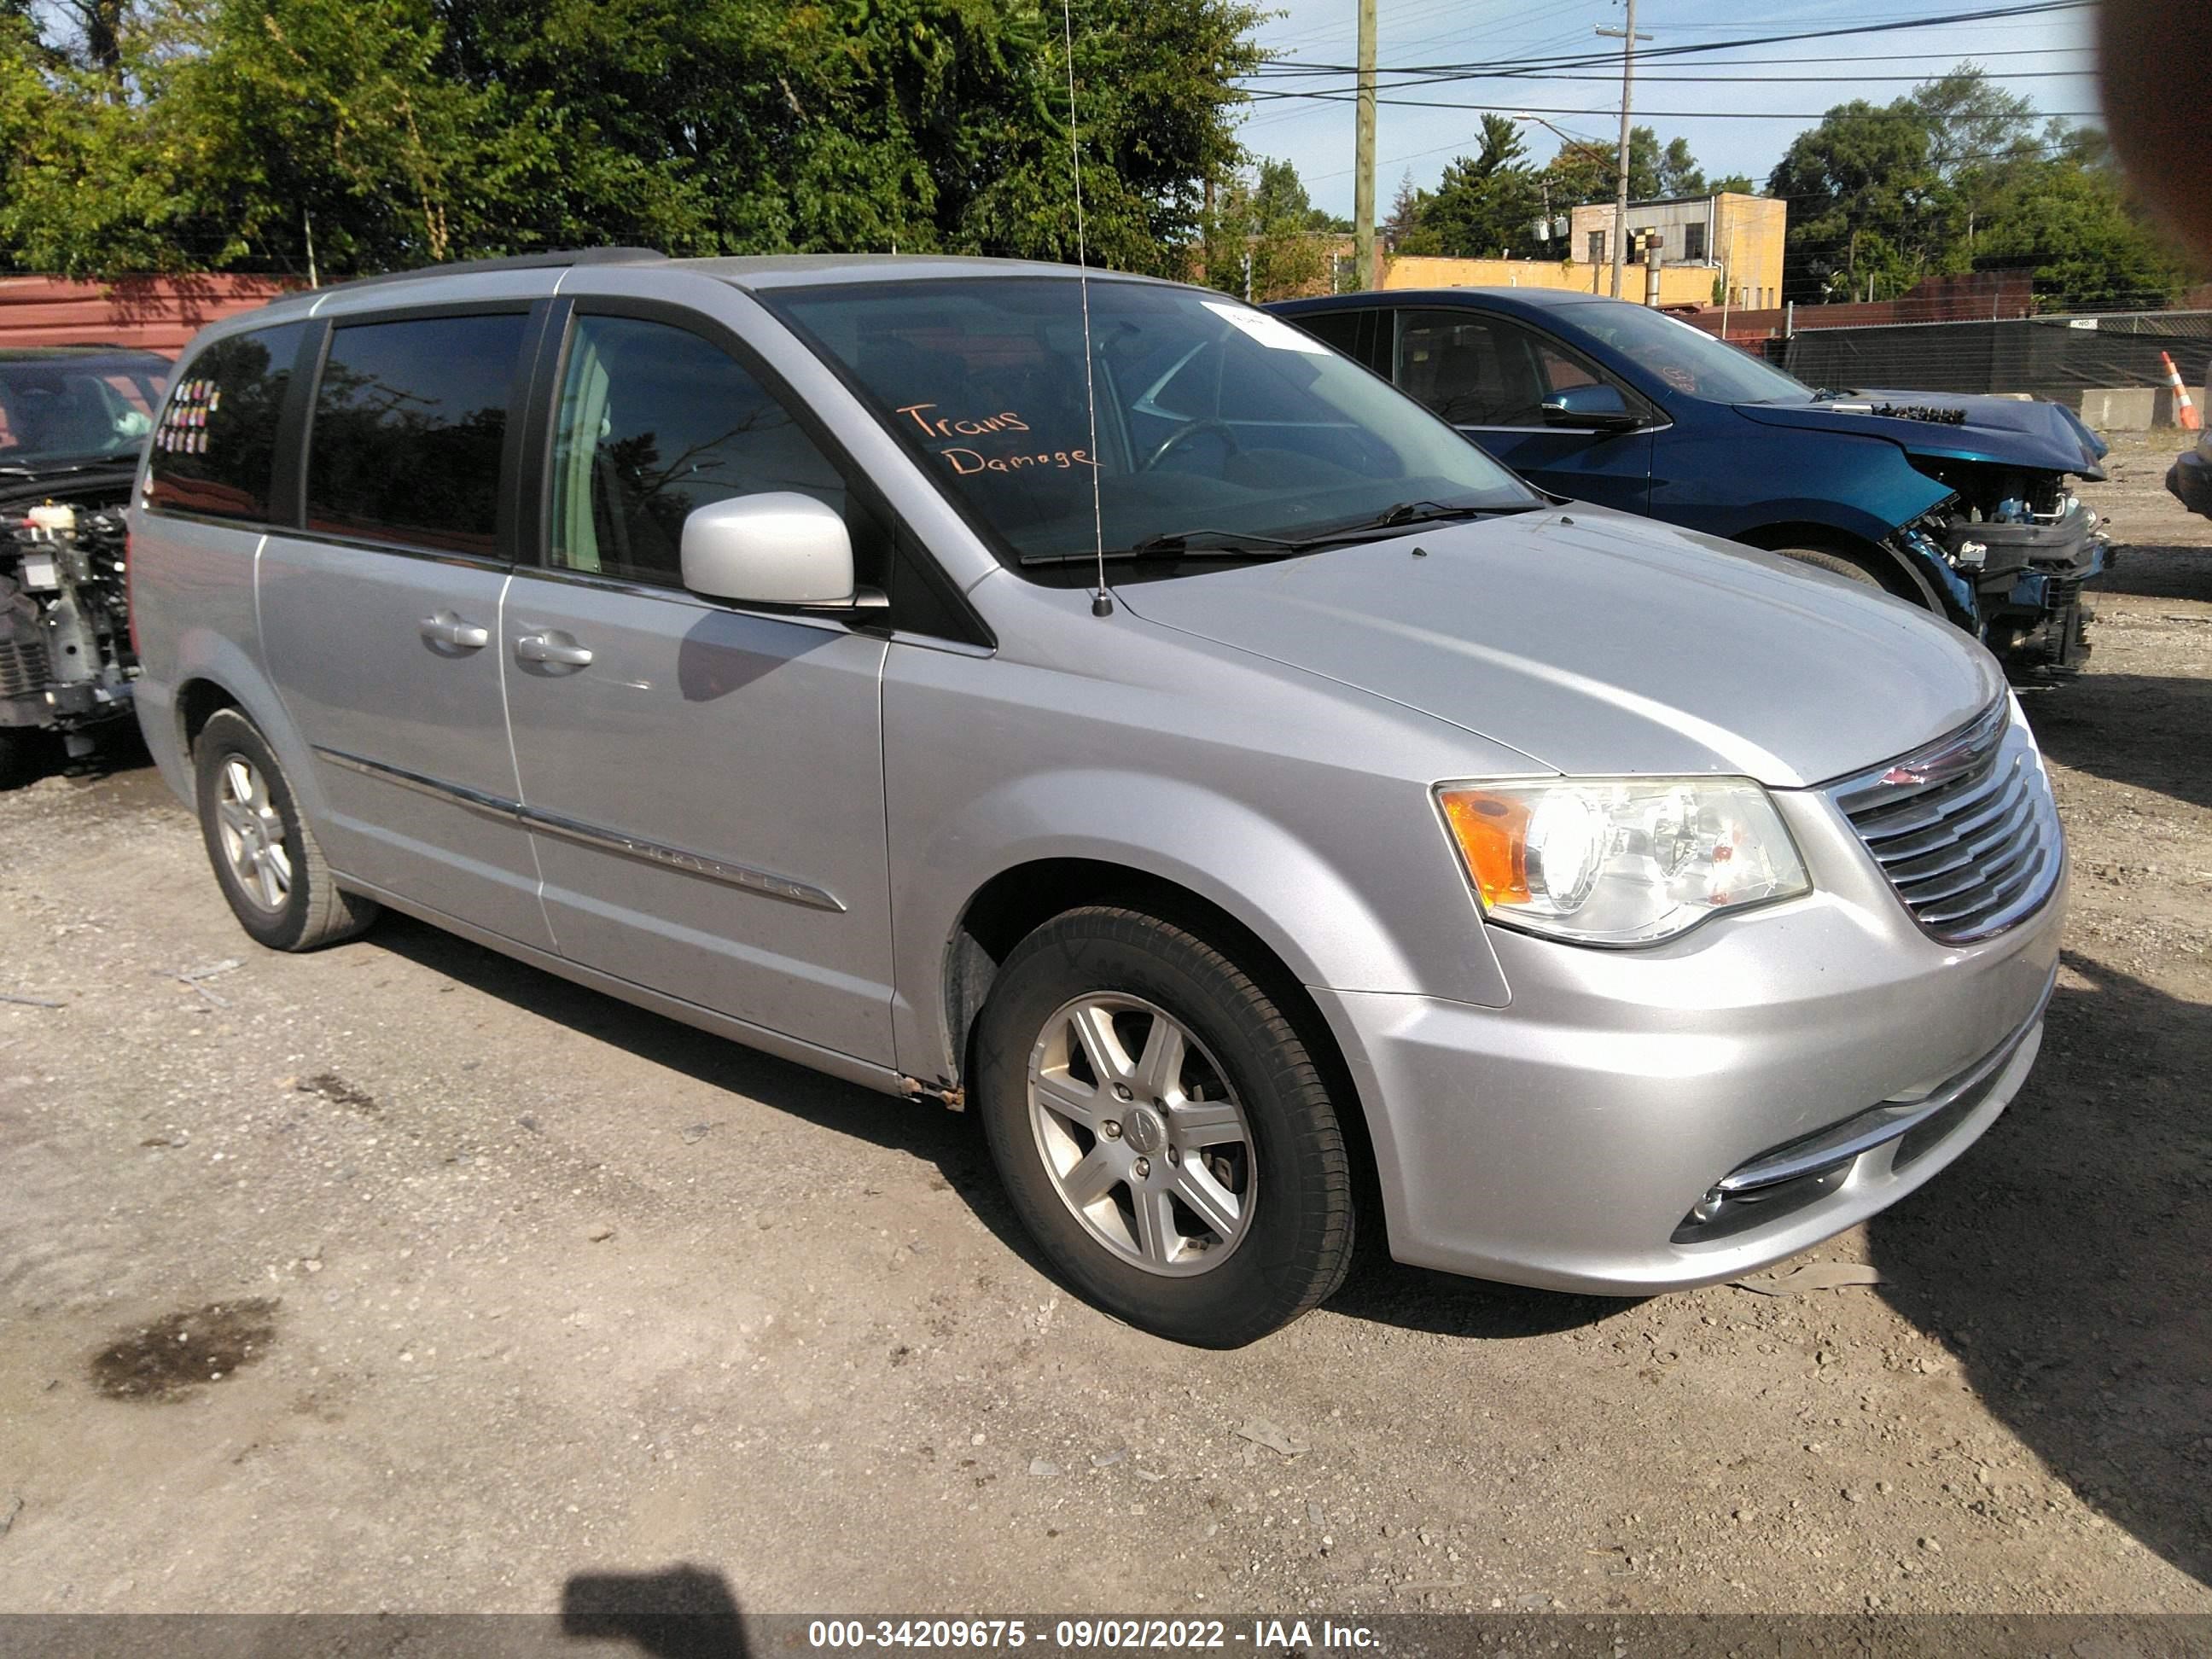 2011 CHRYSLER TOWN & COUNTRY TOURING VIN: 2A4RR5DG2BR747183